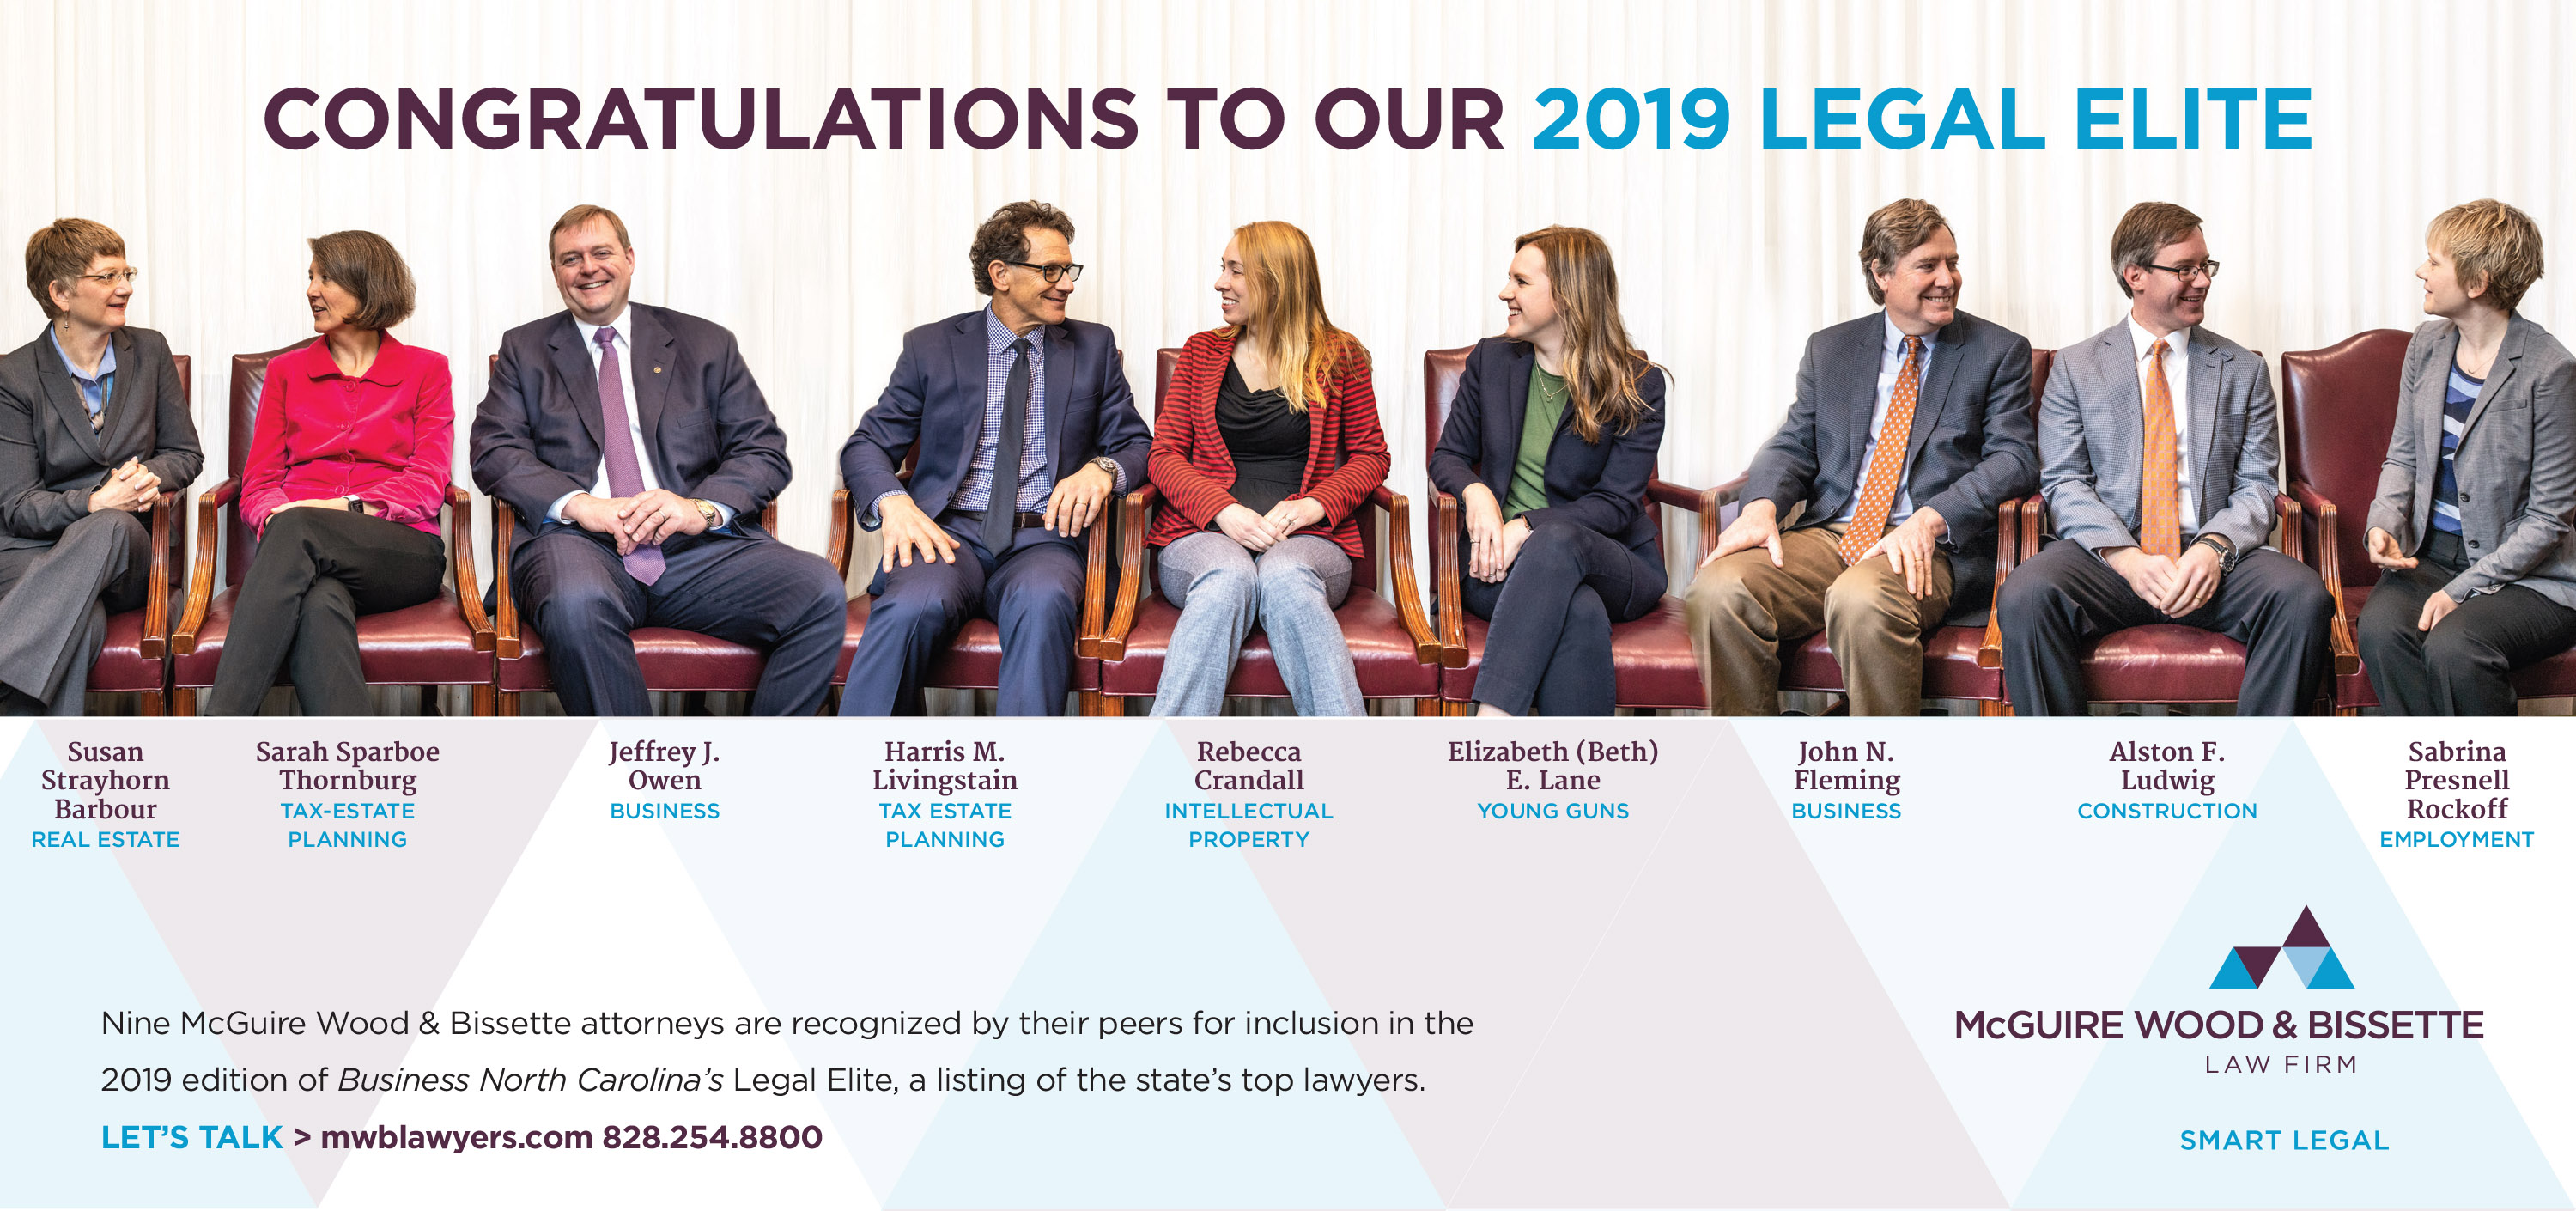 McGuire Wood & Bissette Attorneys Peers Selected to Business North Carolina Magazine's "2019 Legal Elite"